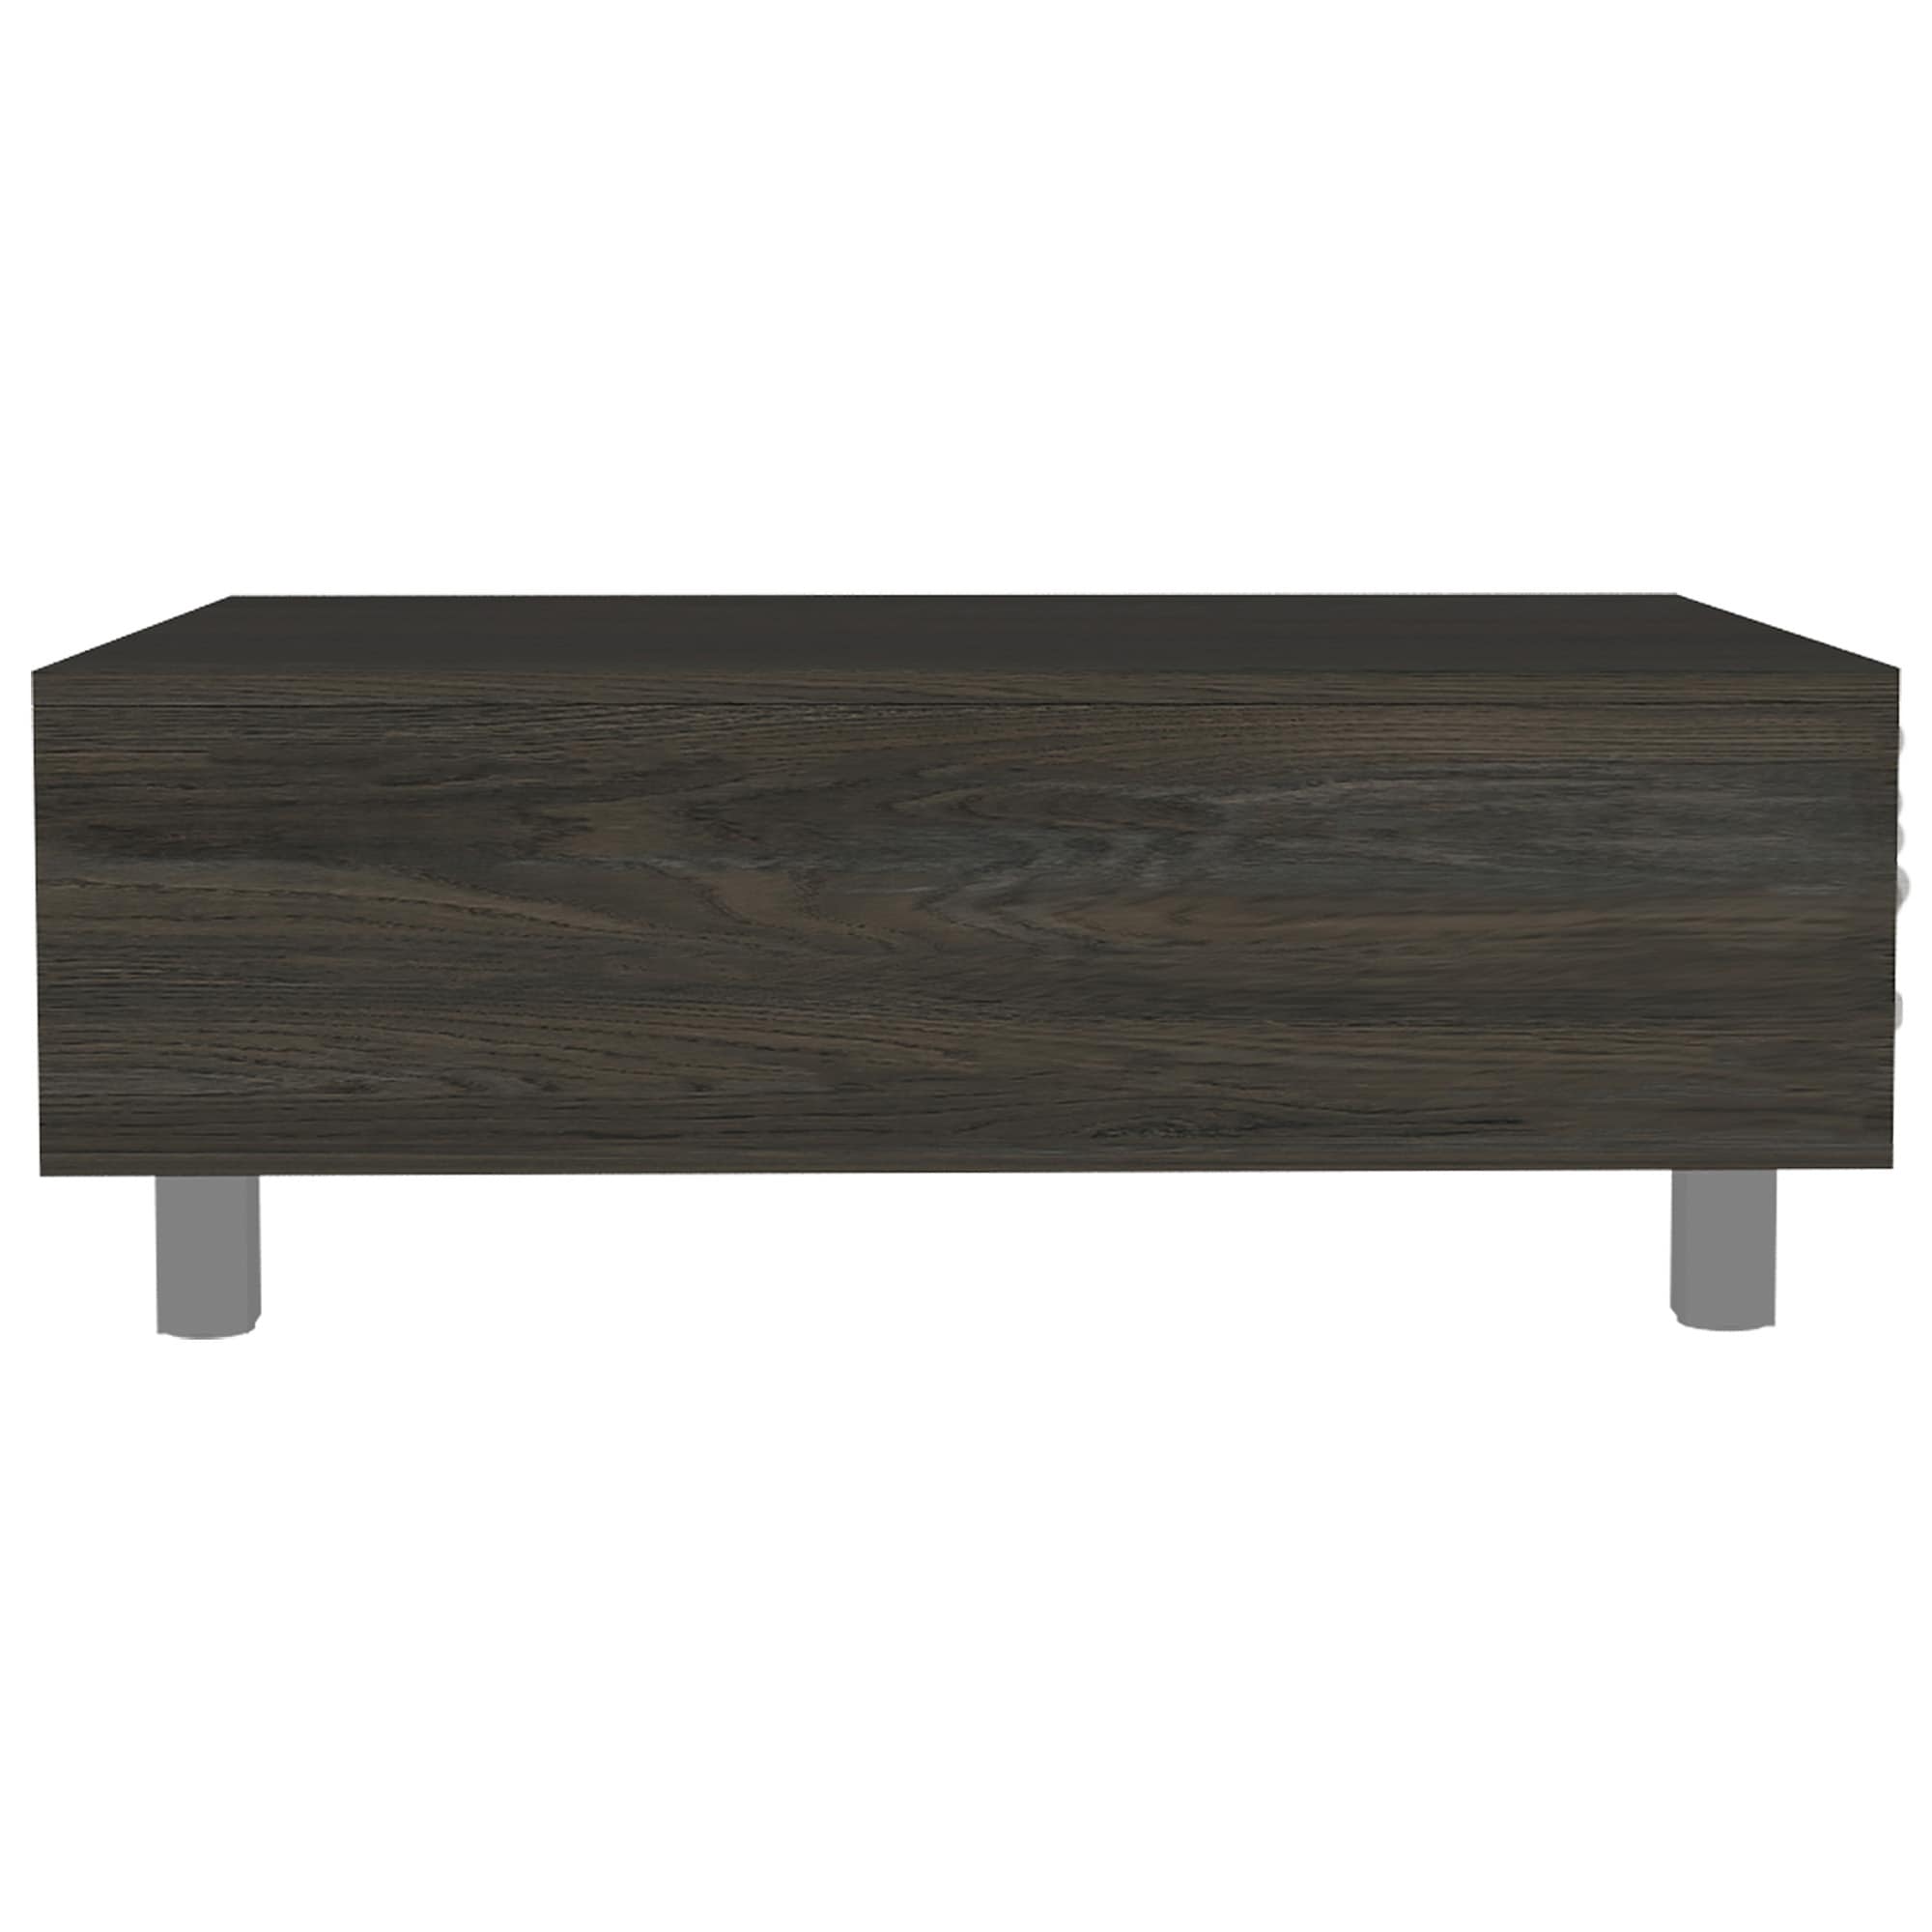 TUHOME Gambia Coffee Table with Lift Top, Concealed Storage and 4 Legs